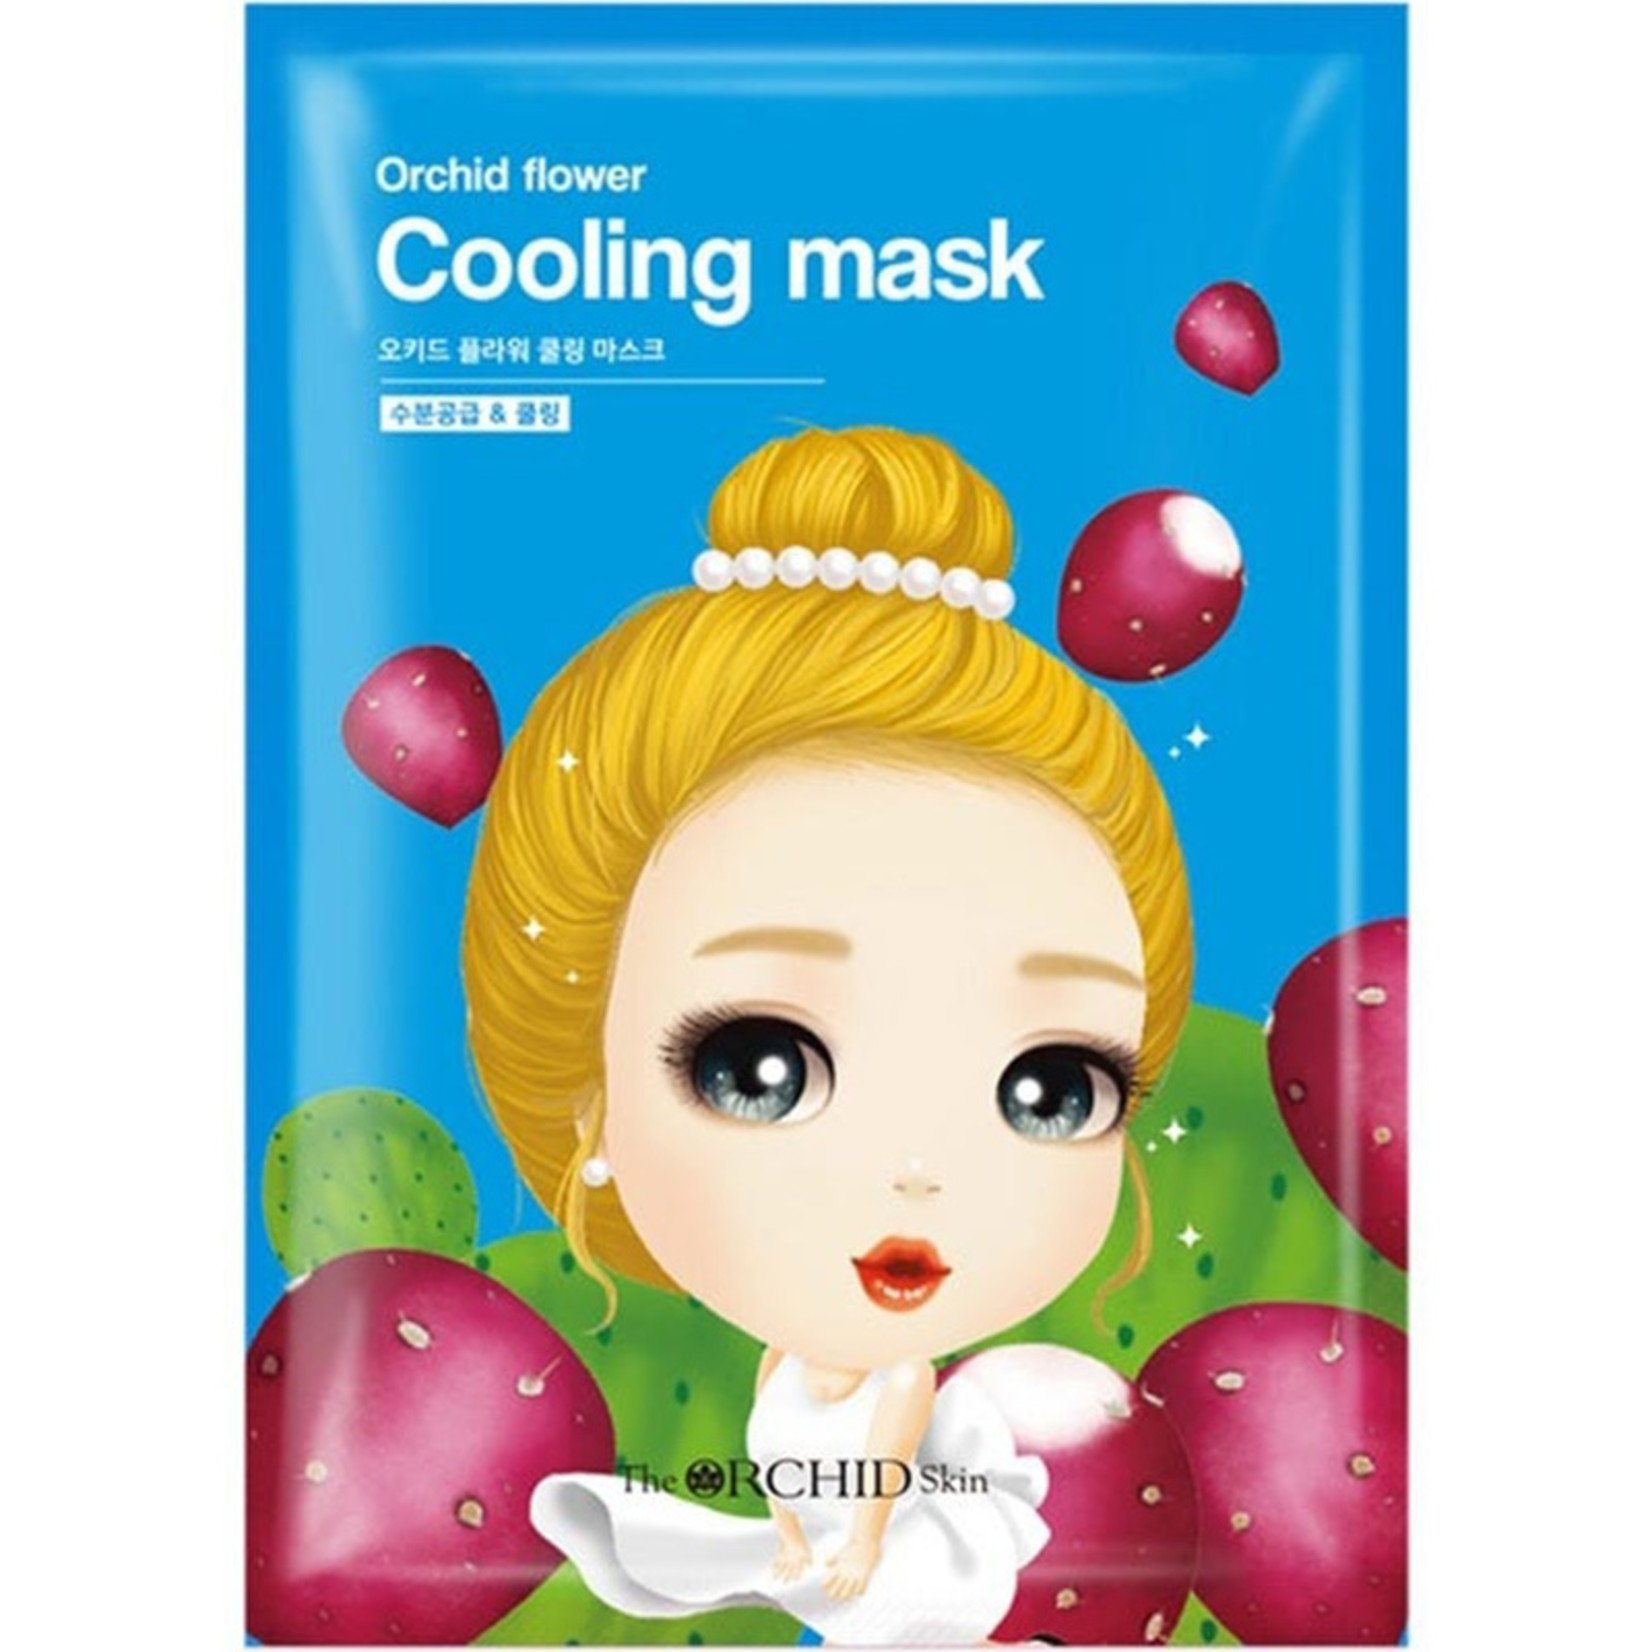 The ORCHID Skin Orchid Flower Cooling Mask